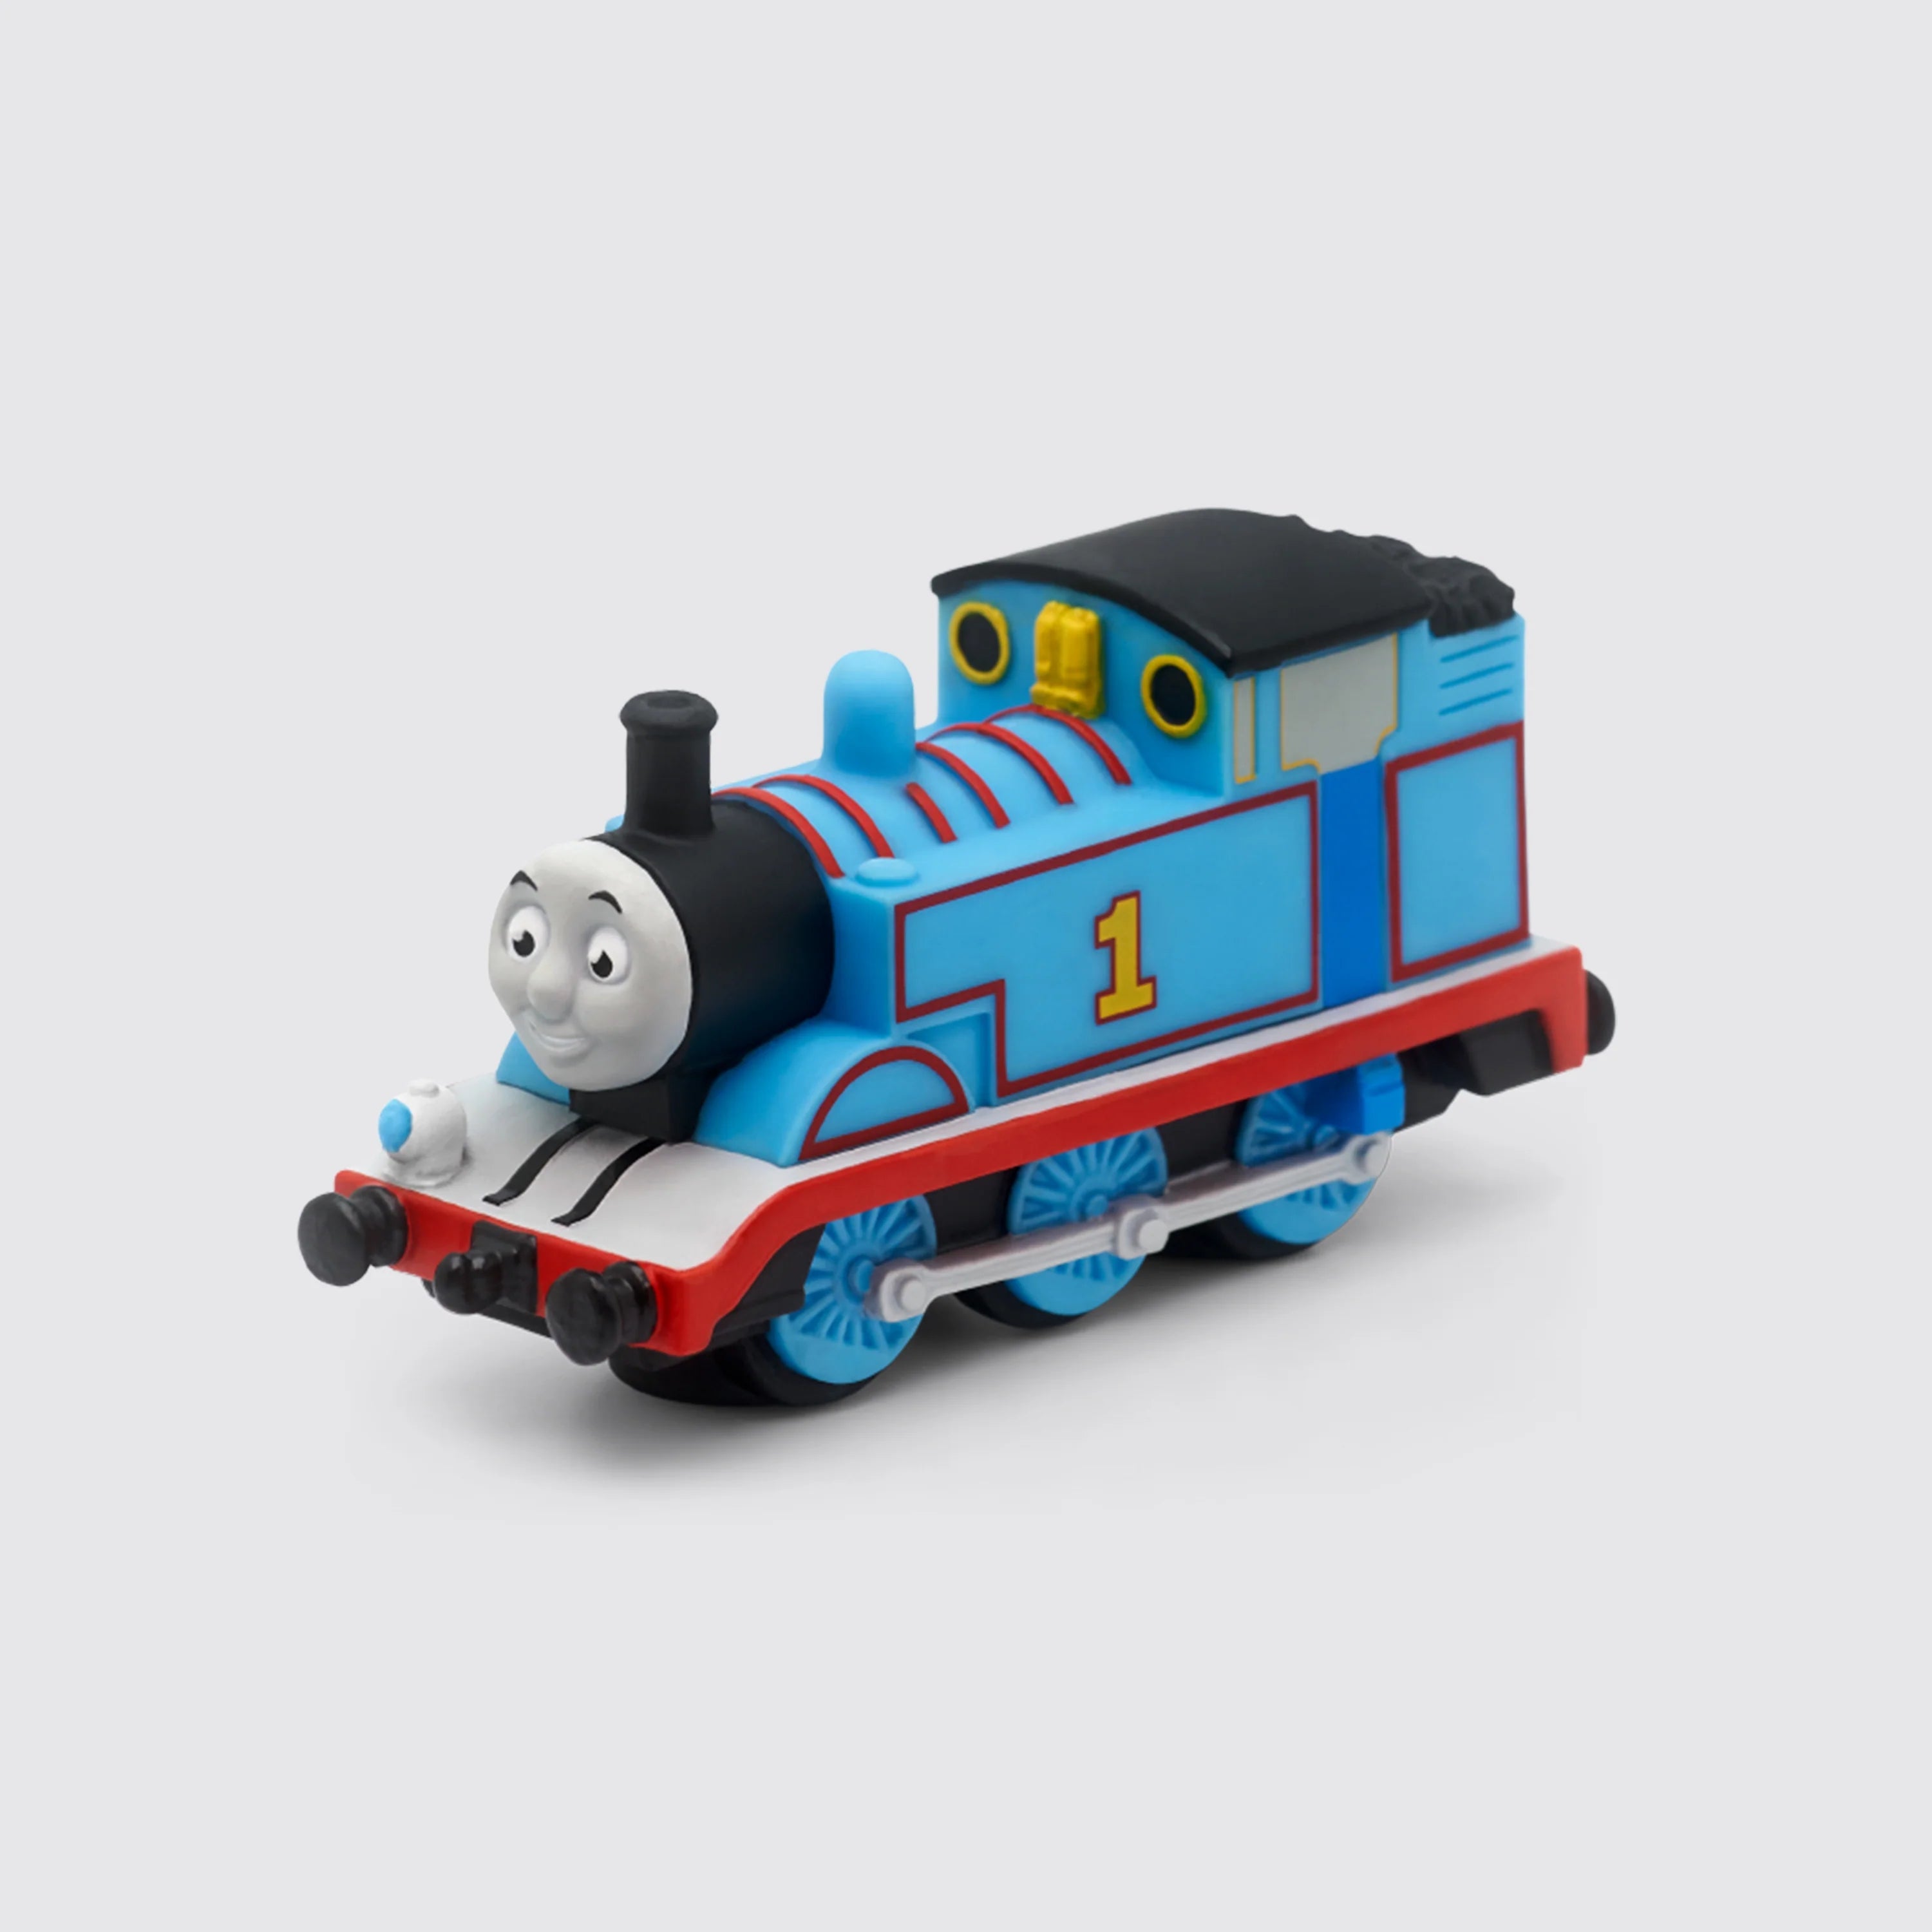 Tonies-Tonies Characters - Thomas & Friends: Thomas the Tank Engine-10000620-Legacy Toys